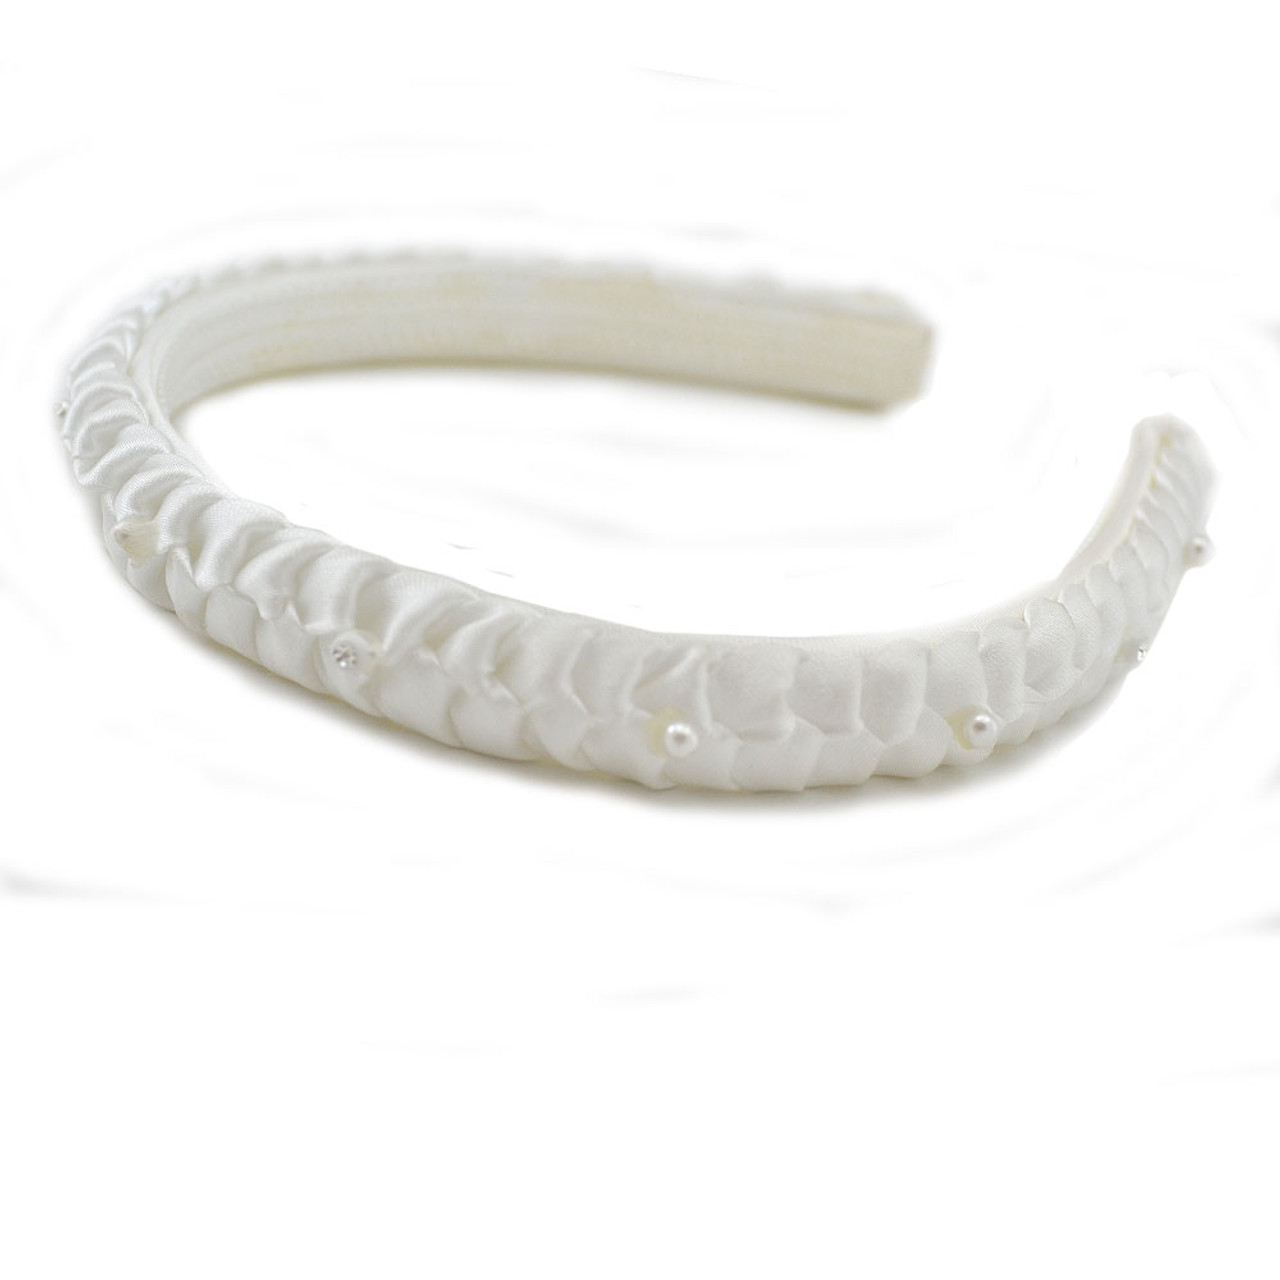 Headband for First Communion without Veil